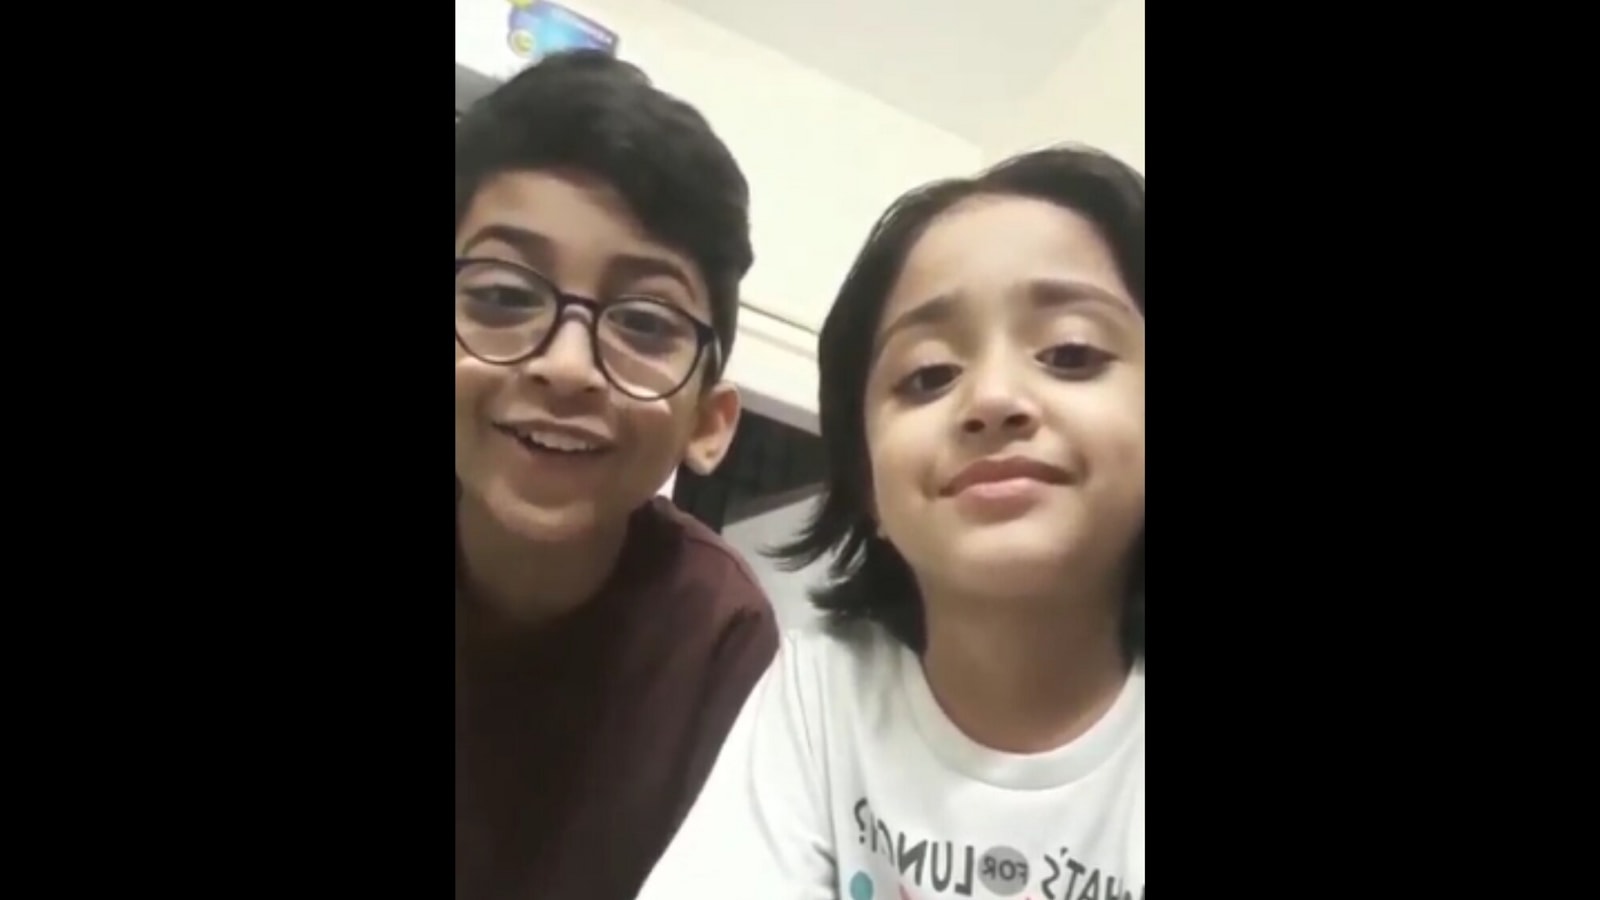 Bhai Bhan Force Sex Porn - Cute little brother-sister duo's video goes viral, Yashraj Mukhate reacts.  Watch | Trending - Hindustan Times